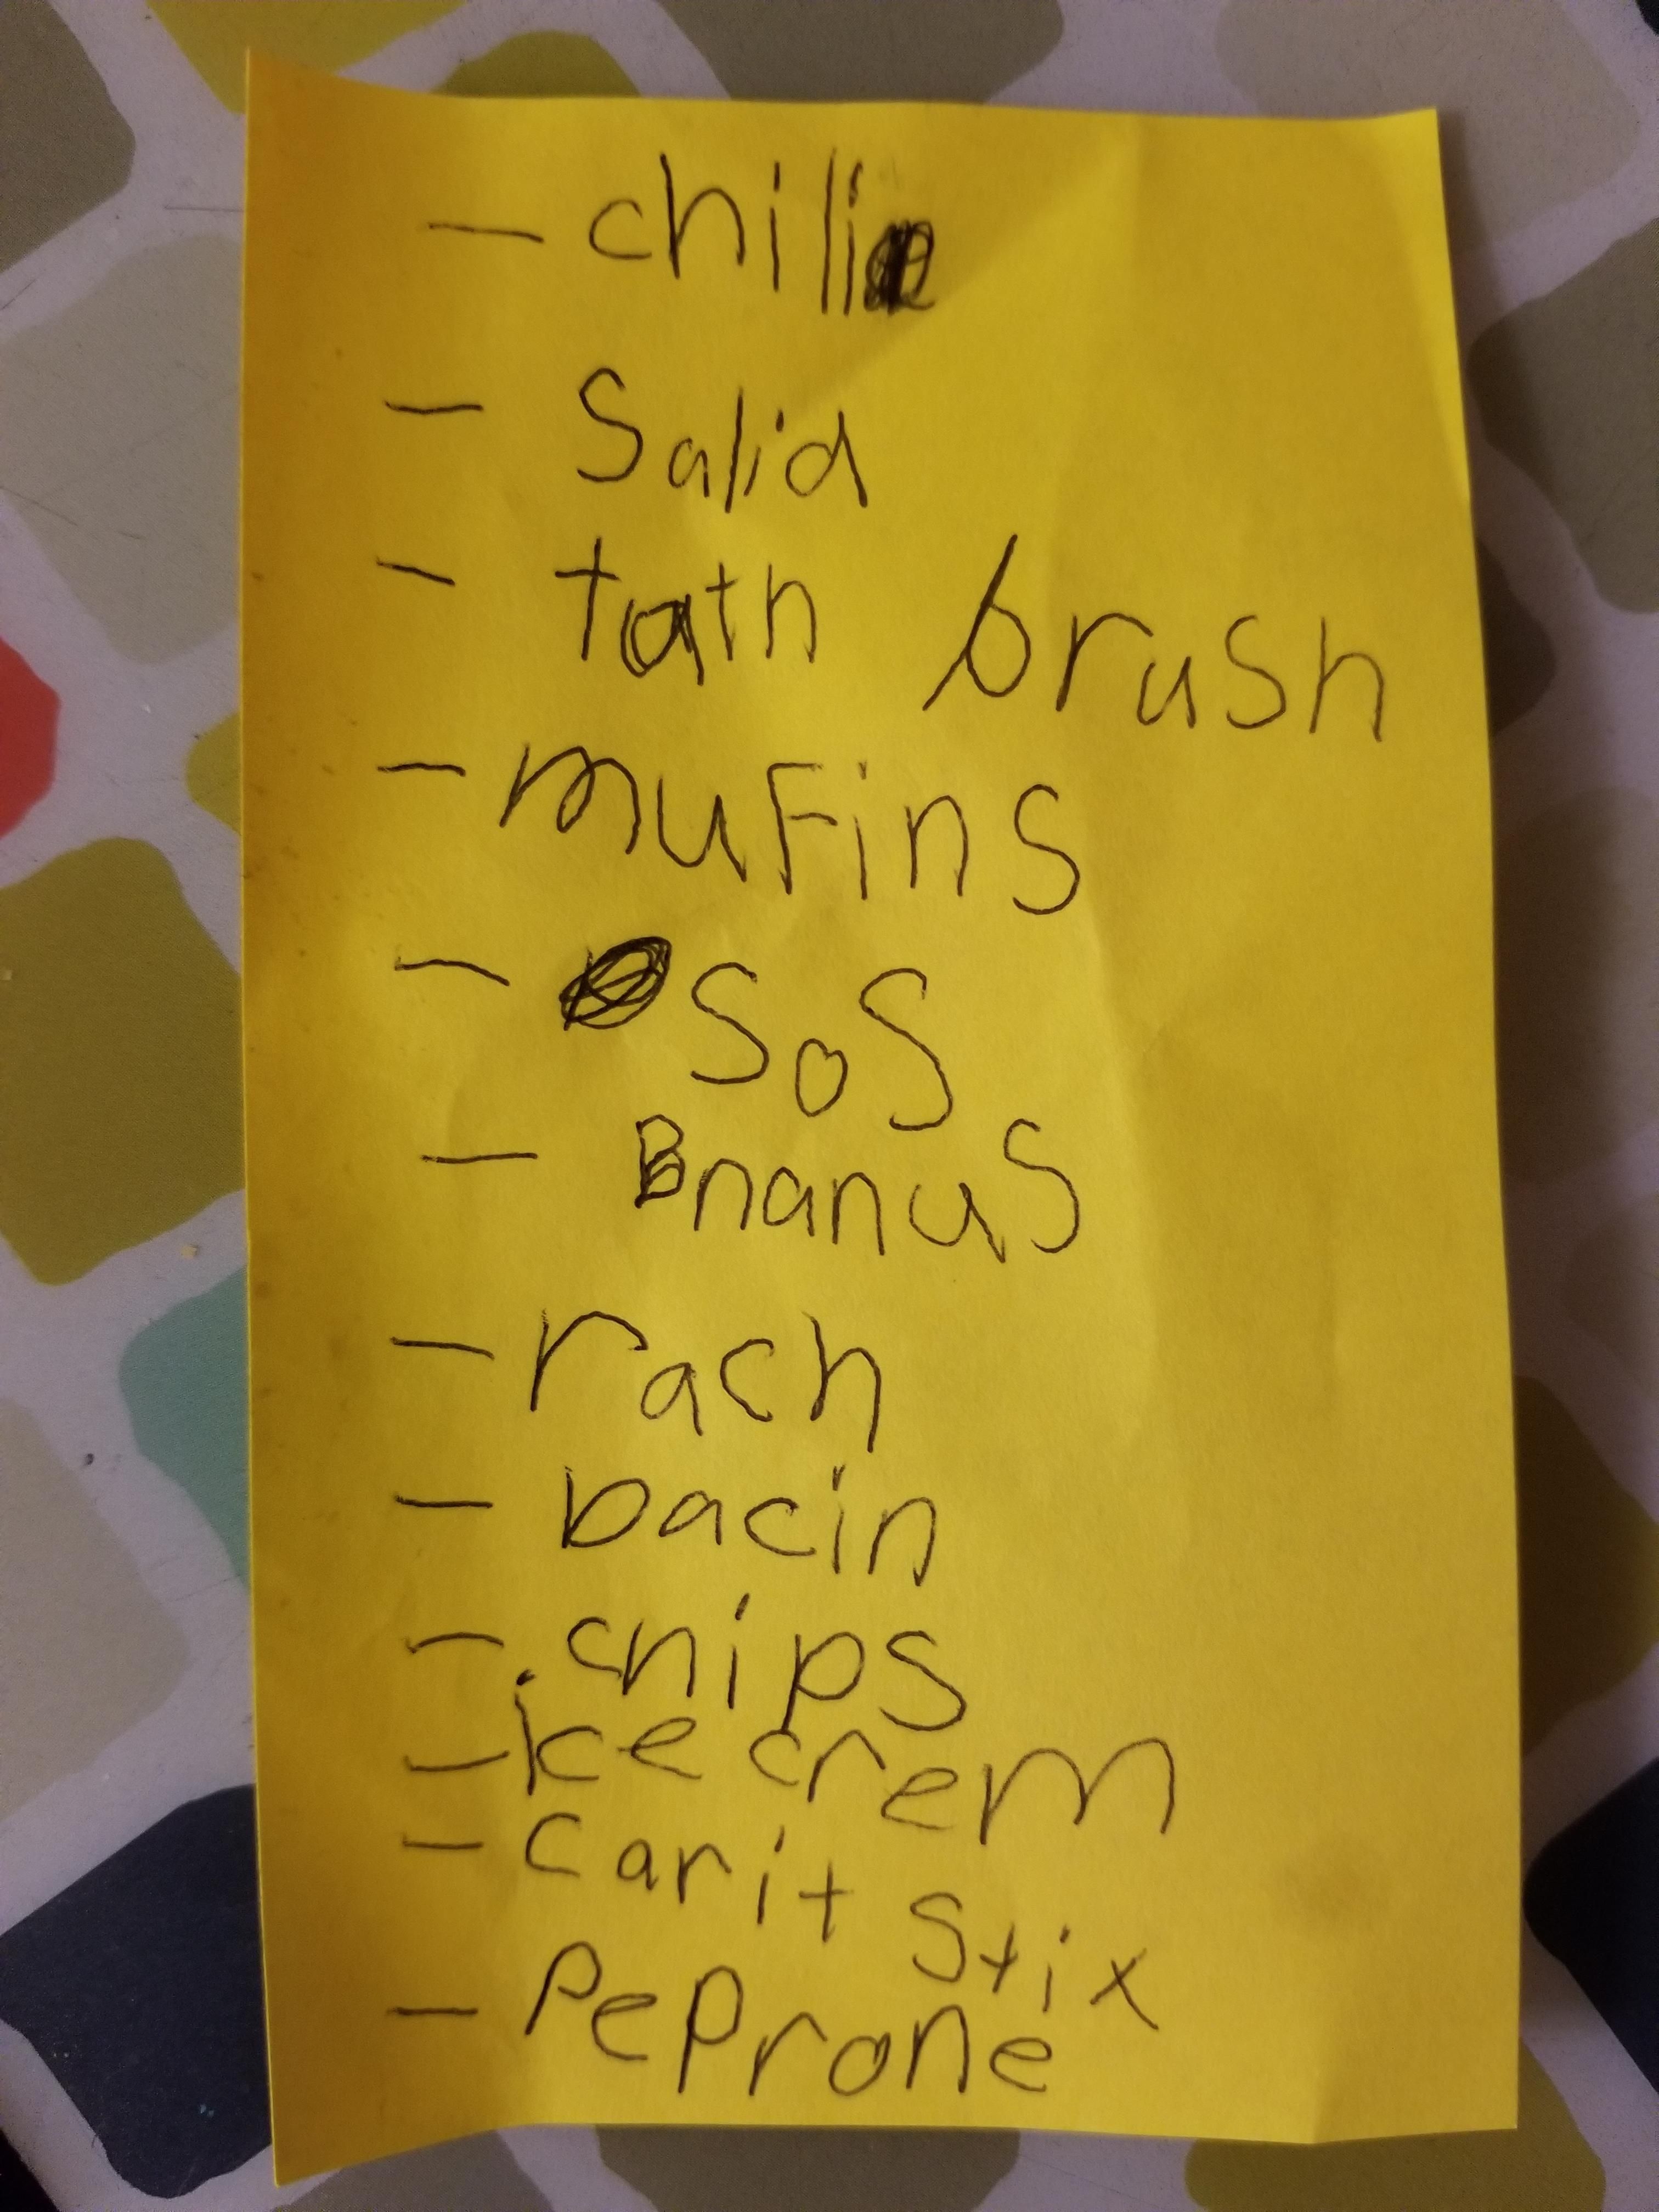 I asked my 6yr old niece to make us a grocery list. This is what she brought back.